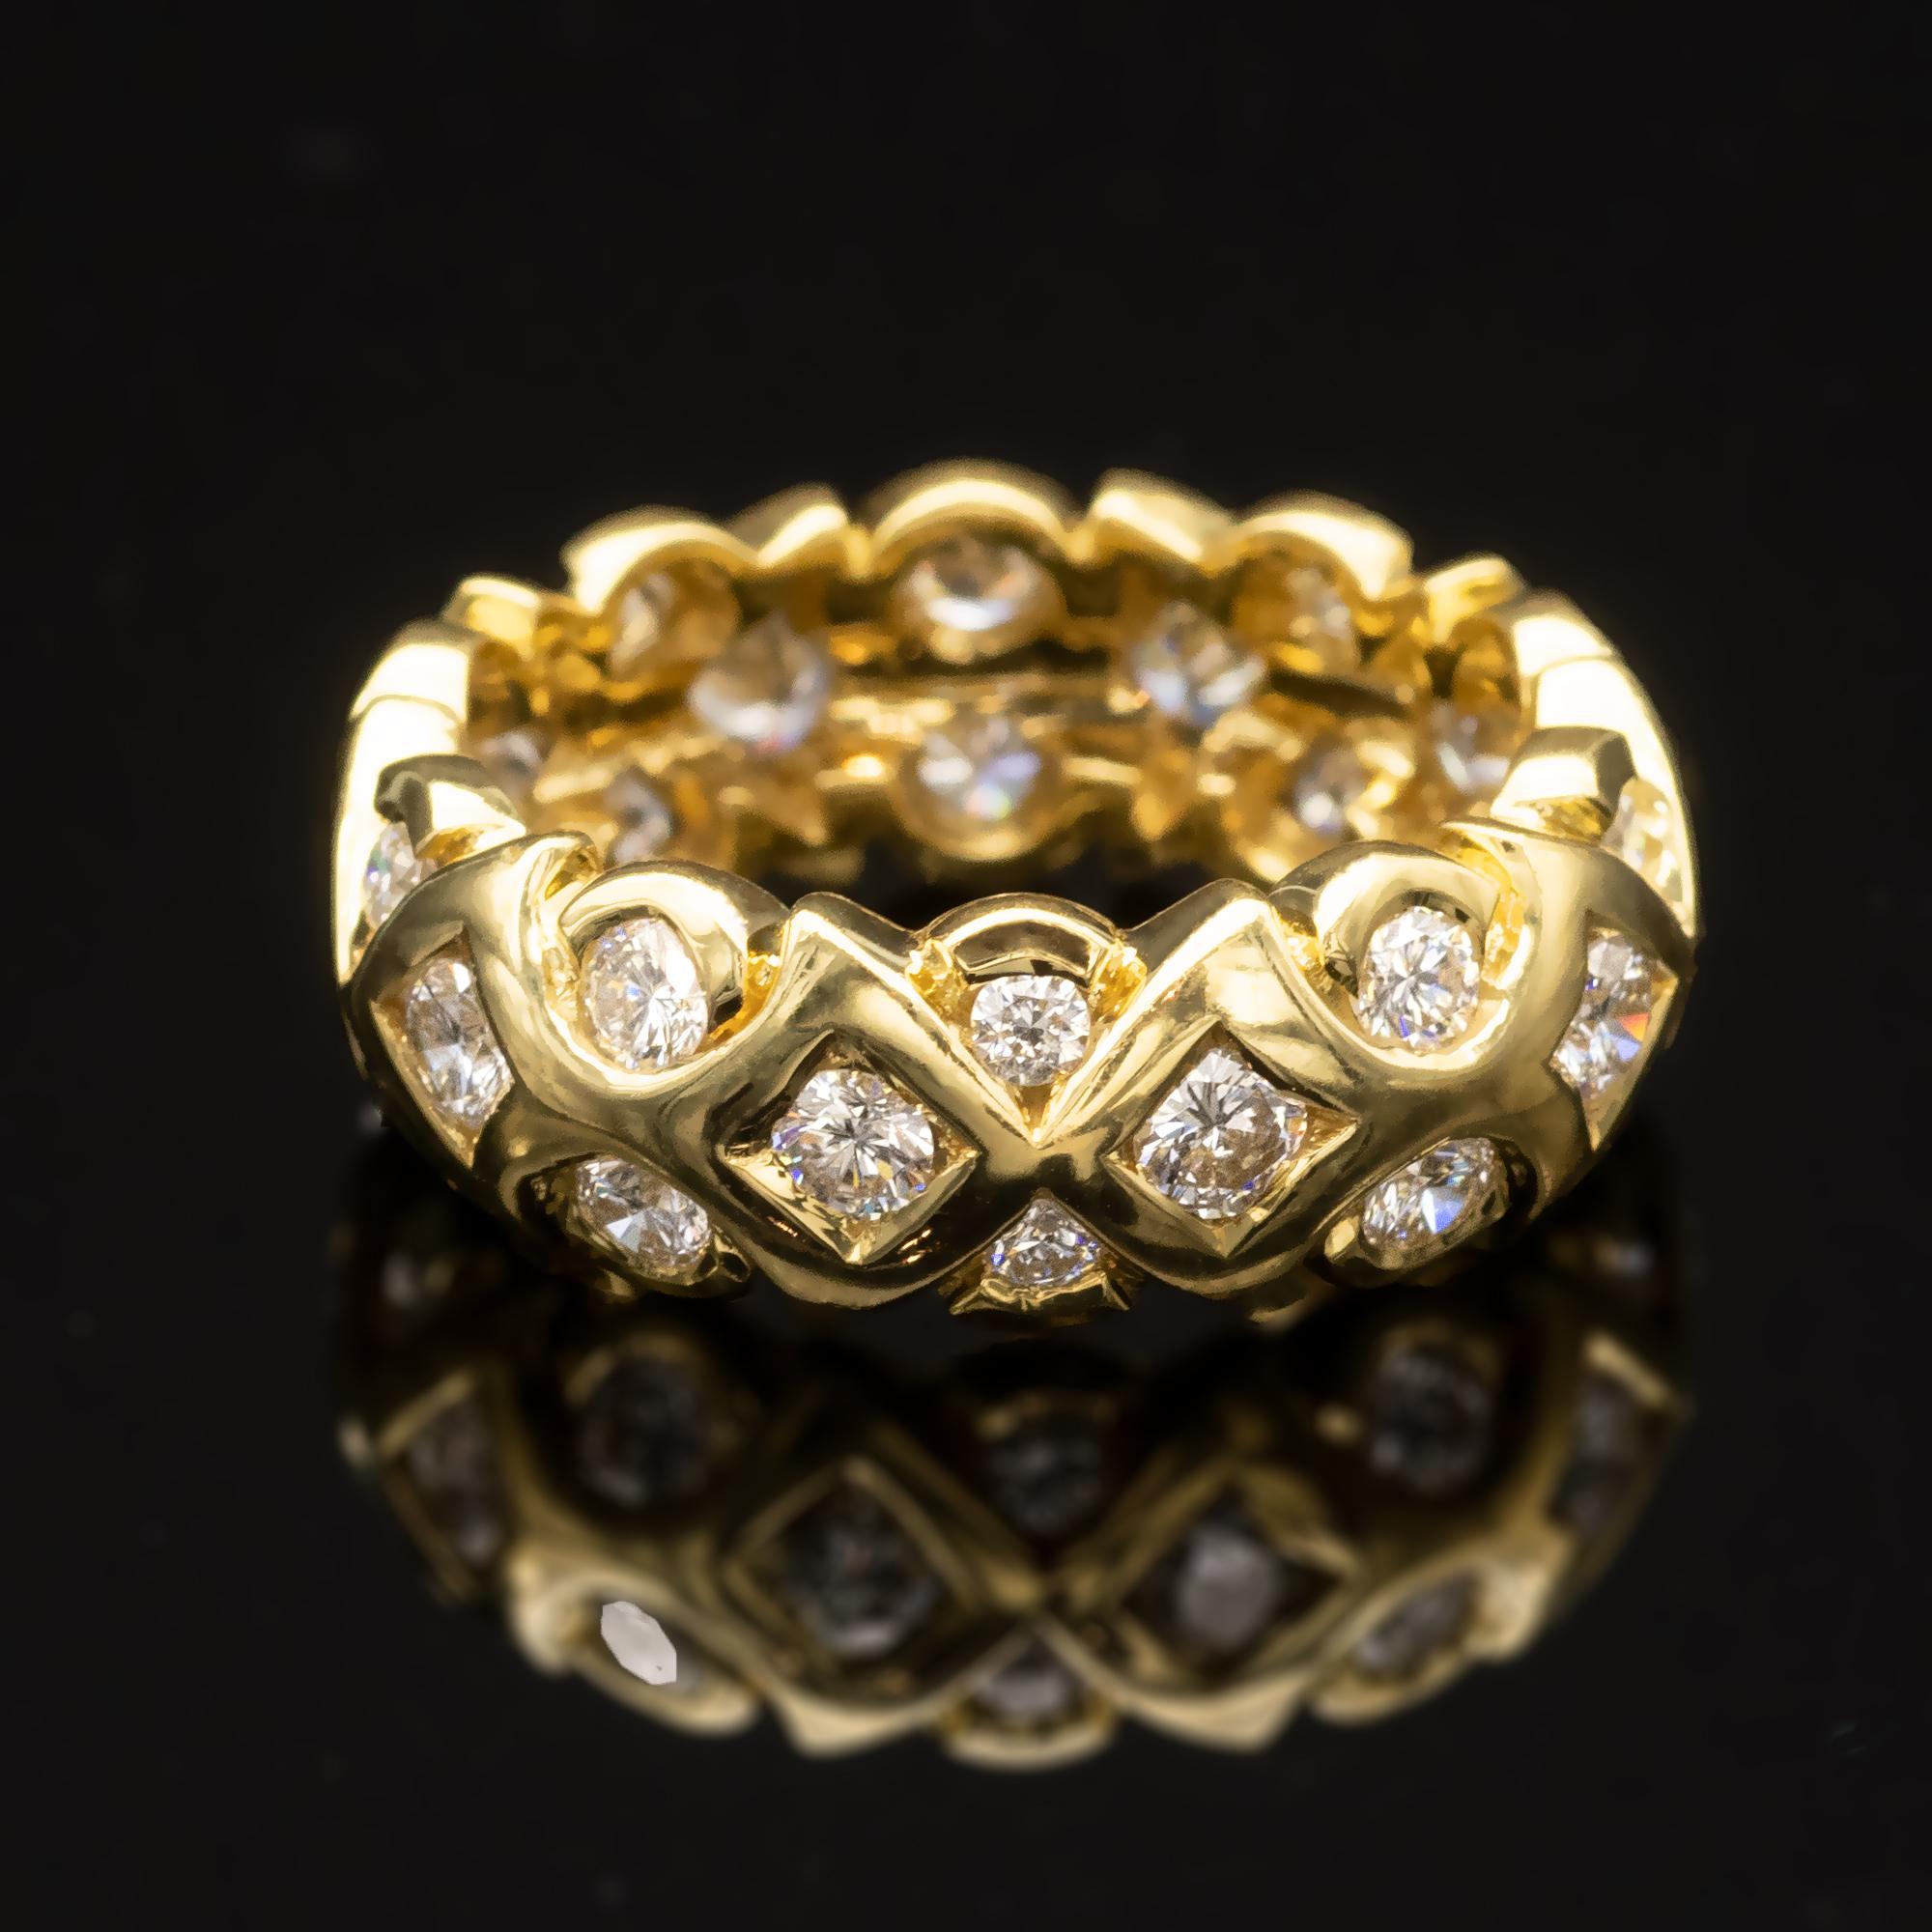 Graceful designer yellow gold wedding ring in which three rows of top quality diamonds are nested in modern arabesque like motives.
Details:
Diamonds: 1.68 carat F/G VVS/VS
Total weight: 8.10 grams  
18 KT french state hallmark stamp
Width: 6.5 mm